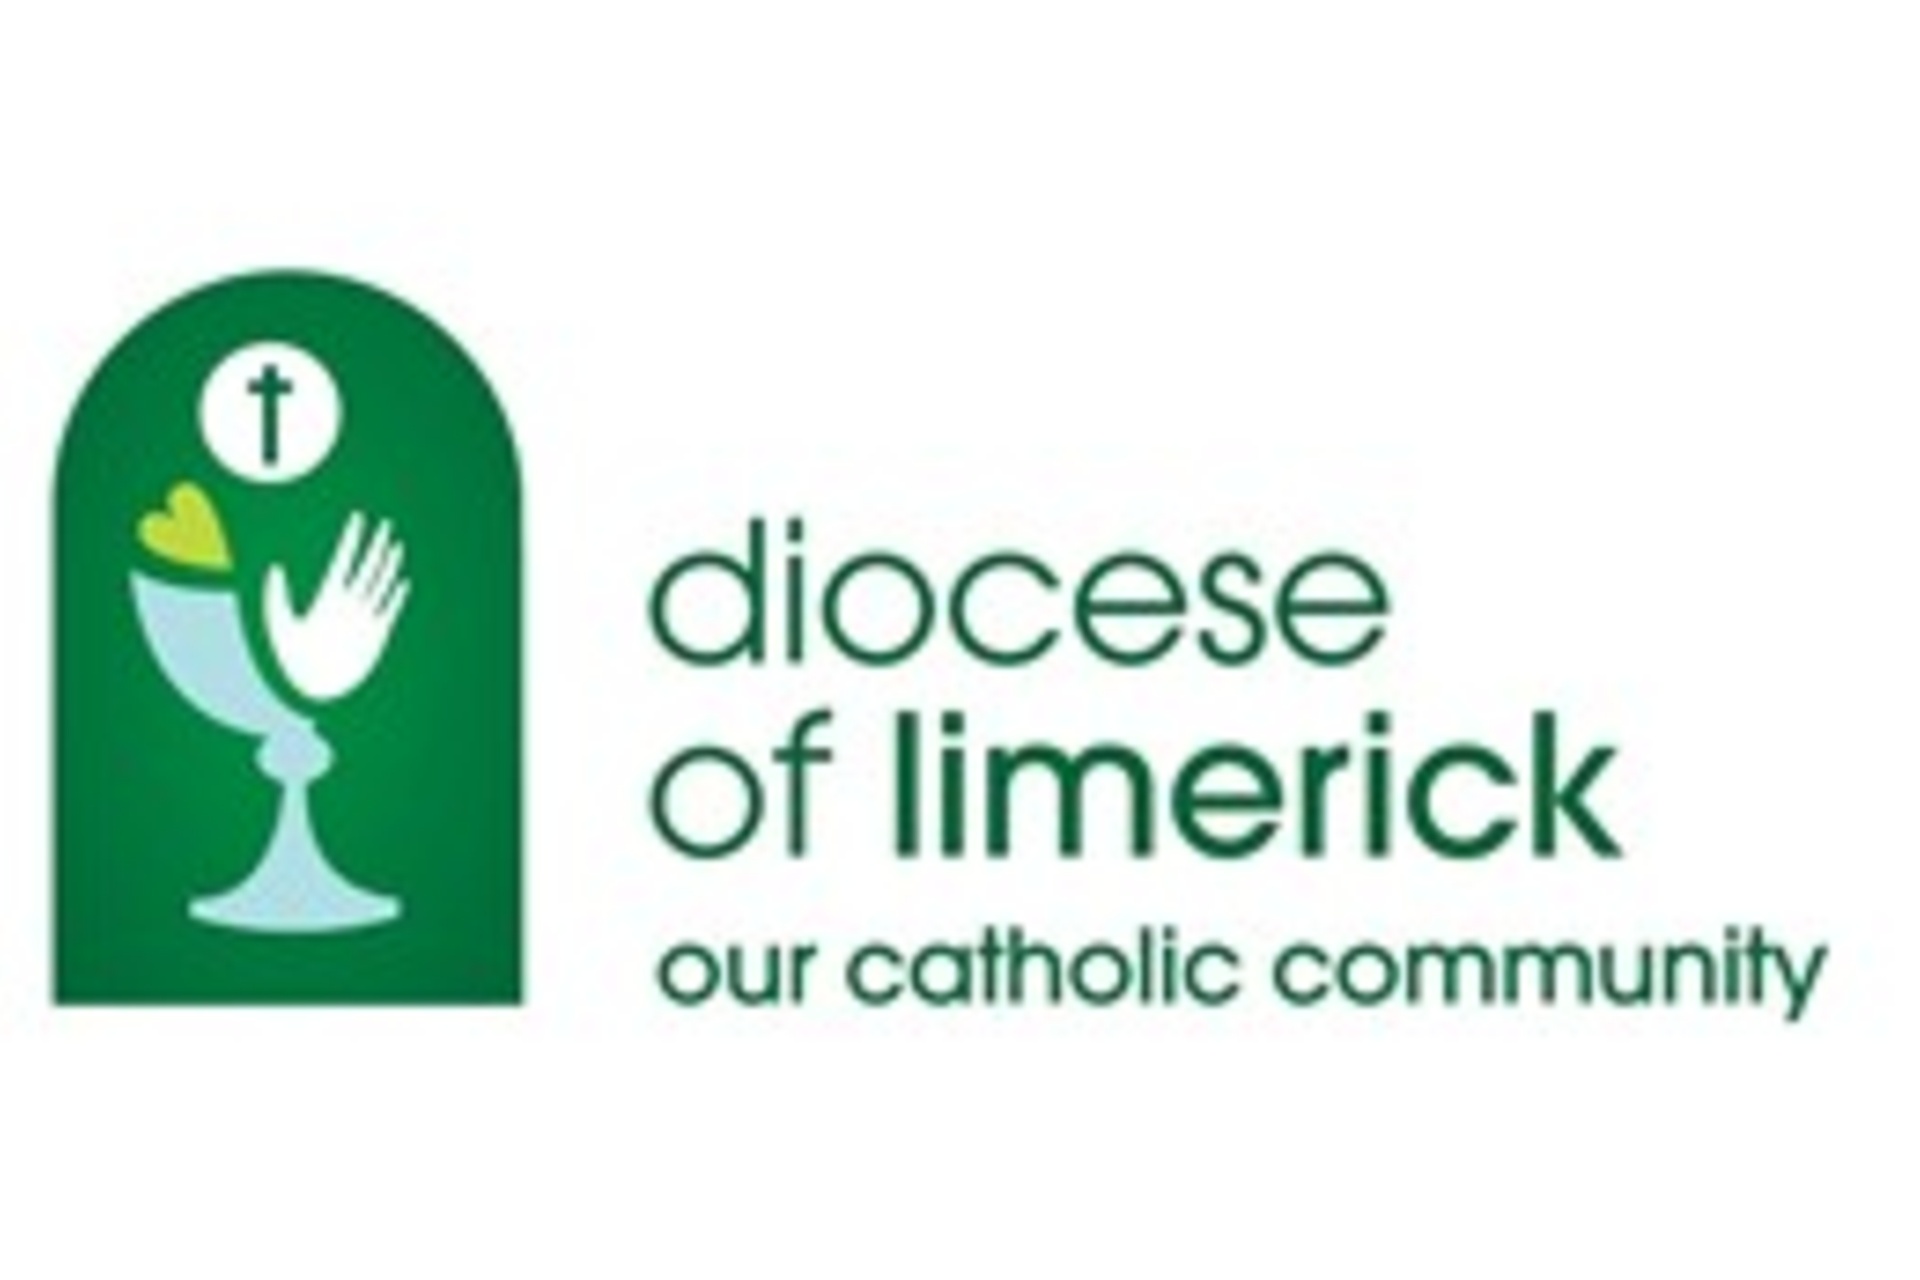 Ireland cannot become inhospitable – Bishop Leahy's St. Patrick's Day message